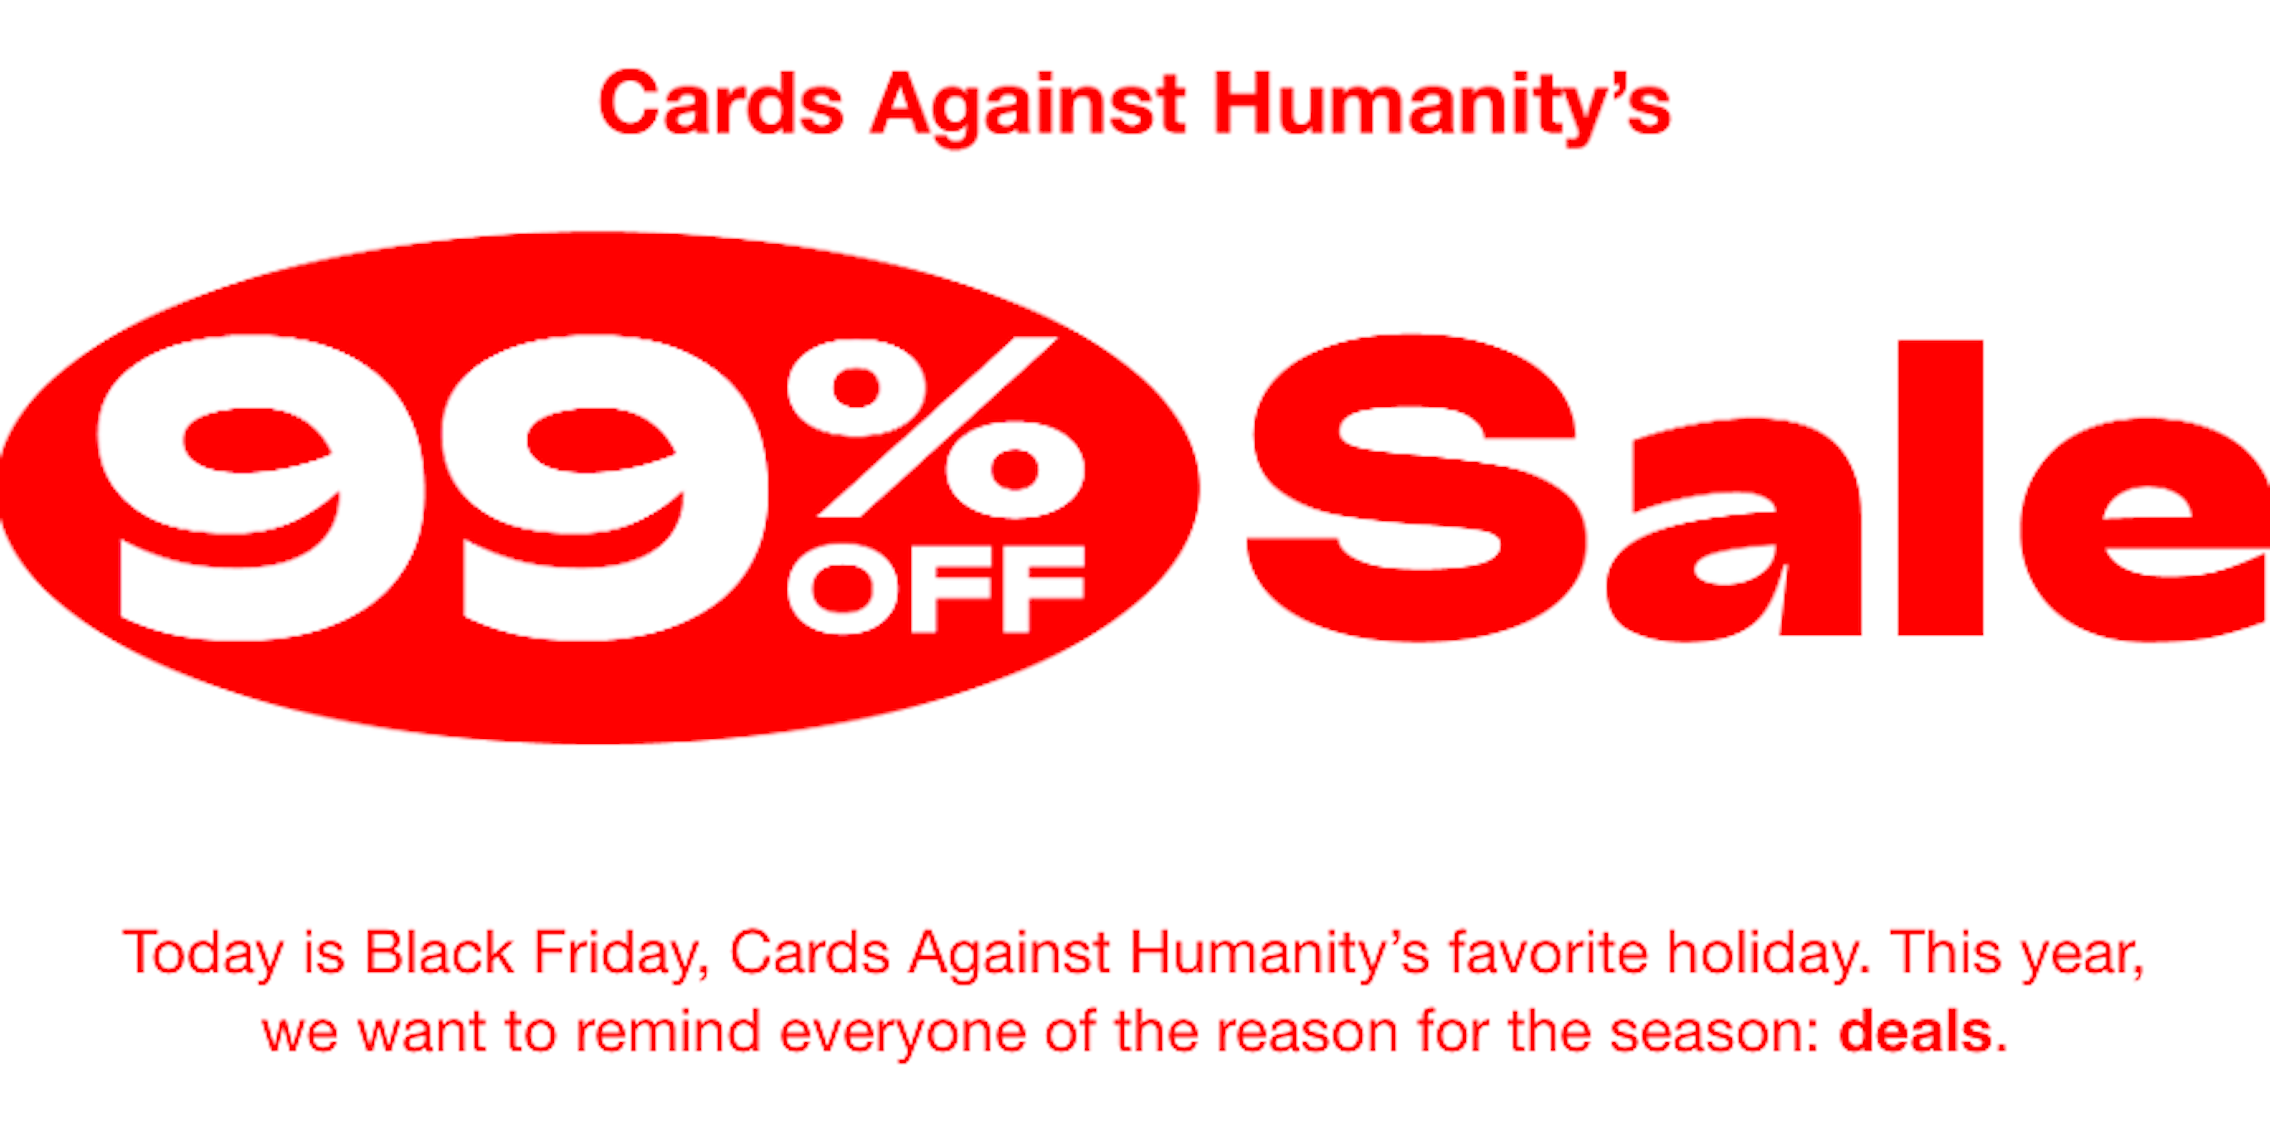 Cards Against Humanity Is Having a 99 Off Black Friday Sale